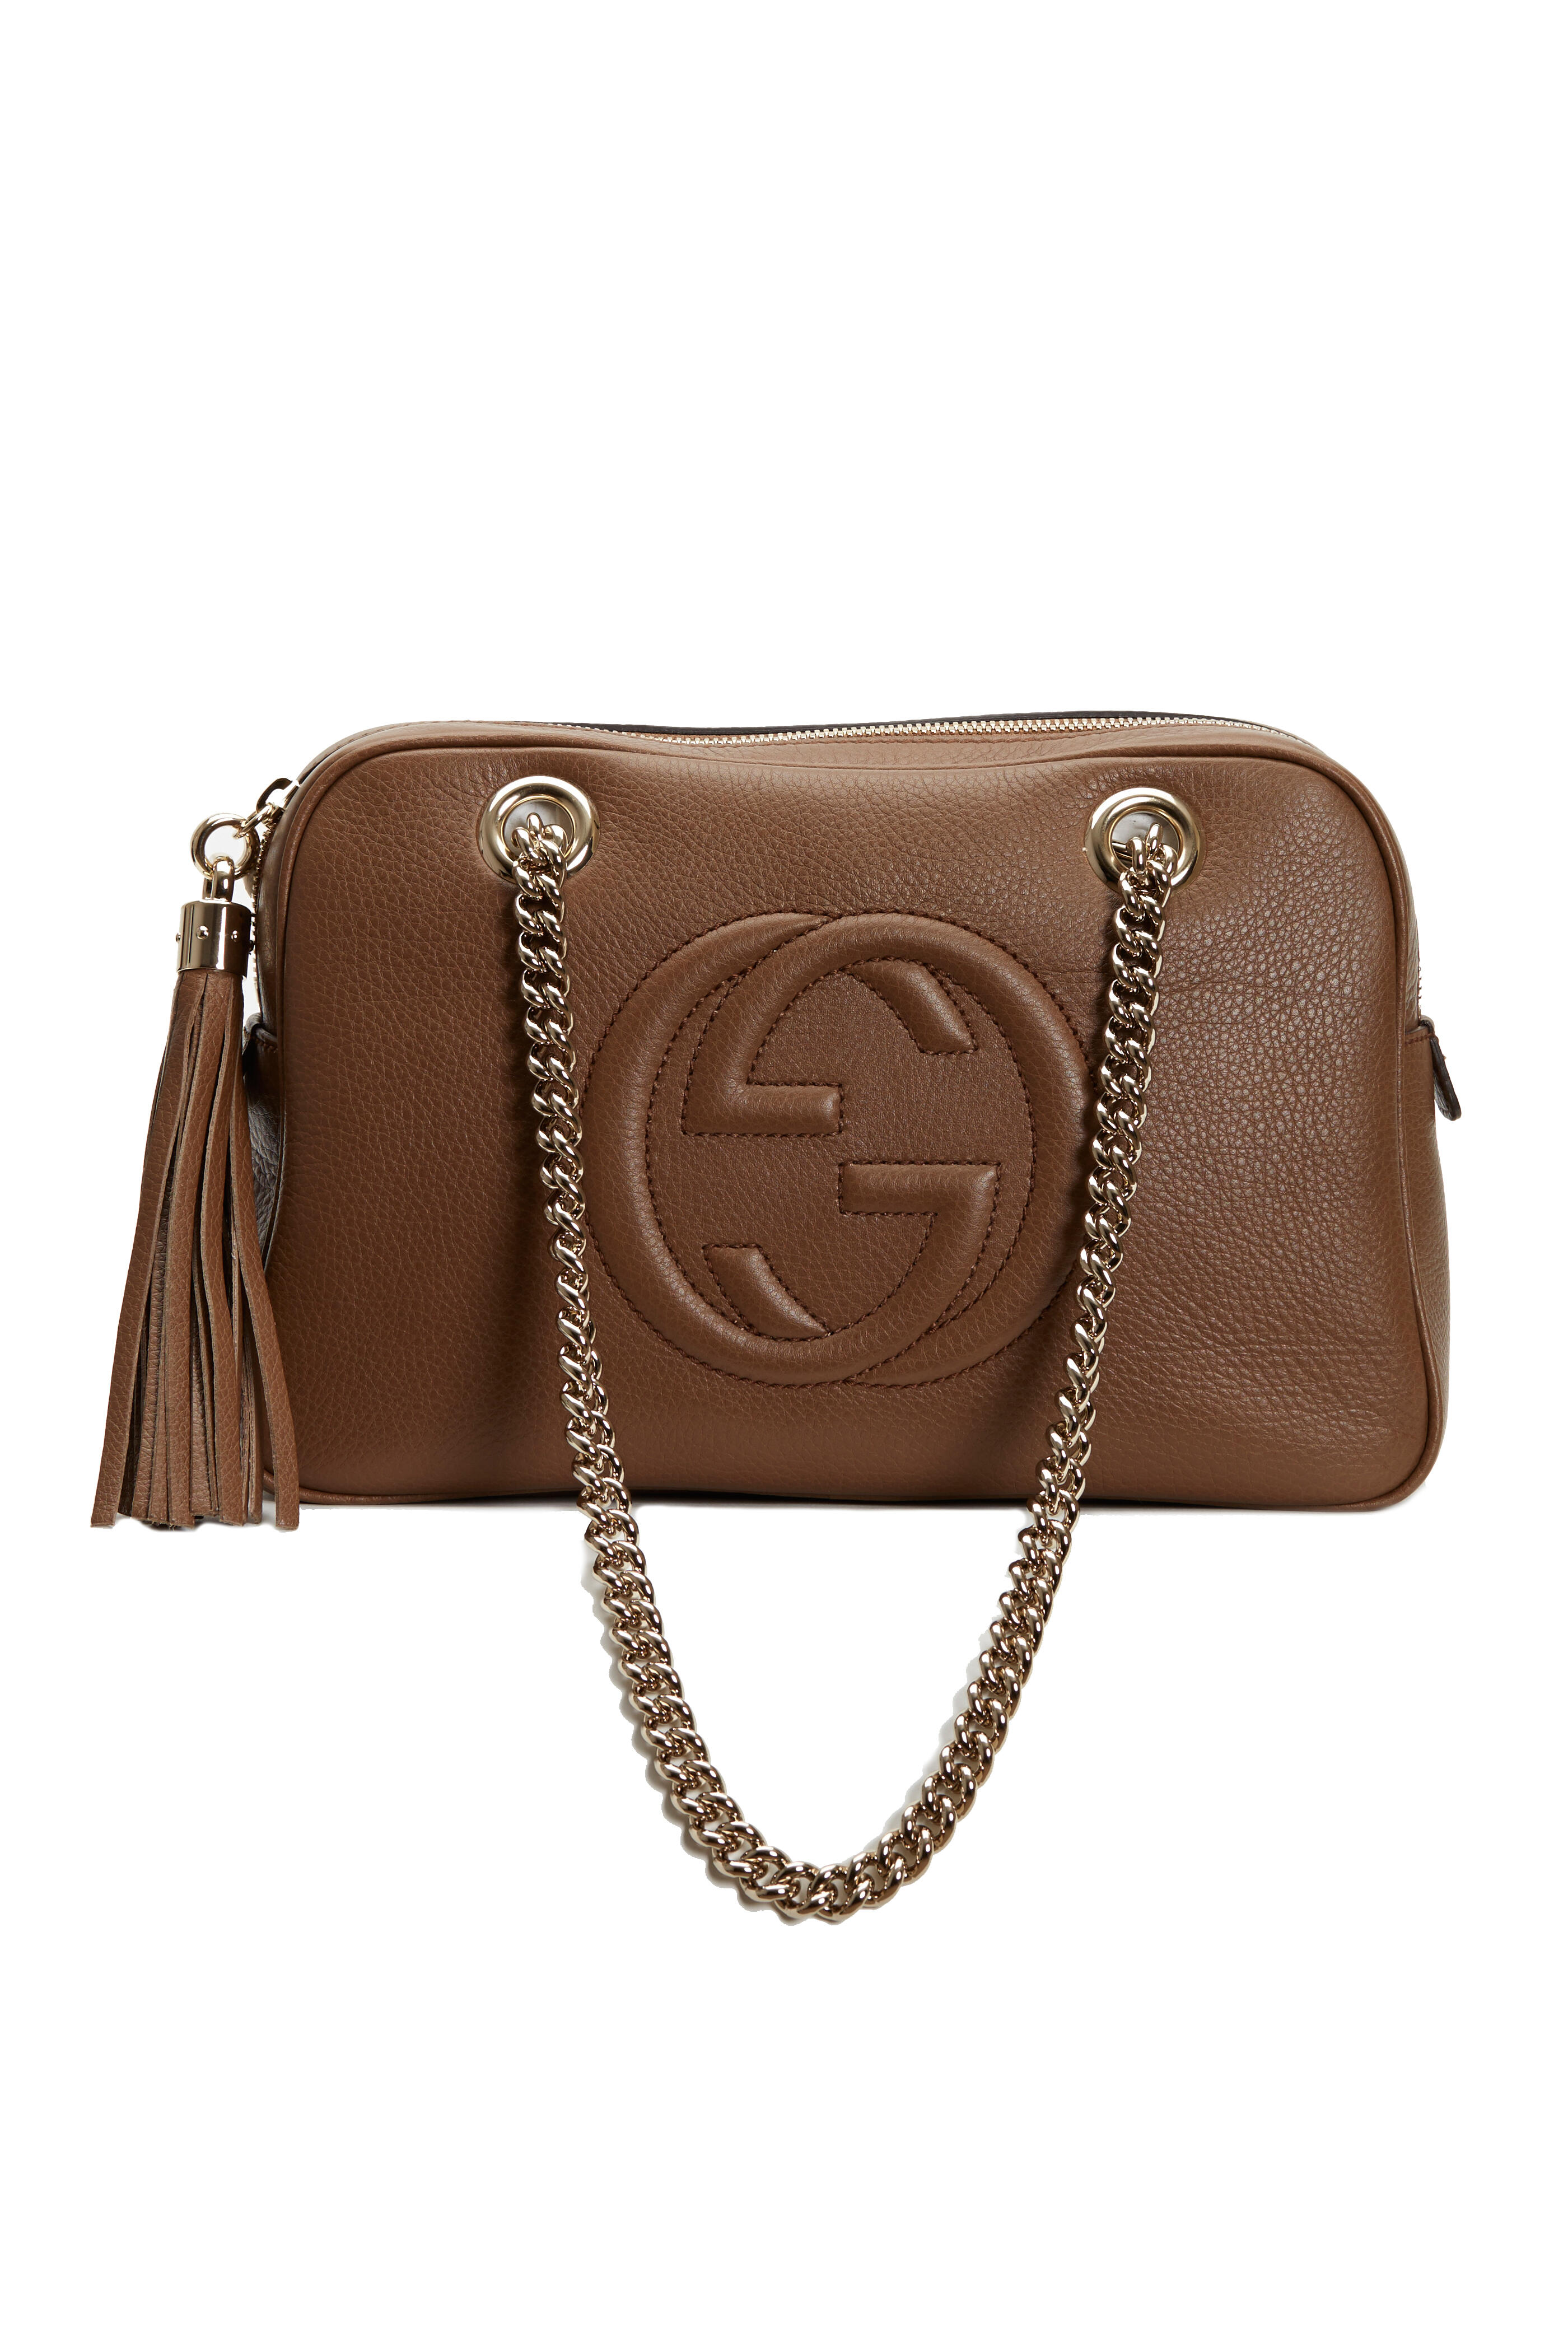 Guggenheim Museum illoyalitet Forblive Gucci - Soho Brown Leather Double Chain Strap Shoulder Bag